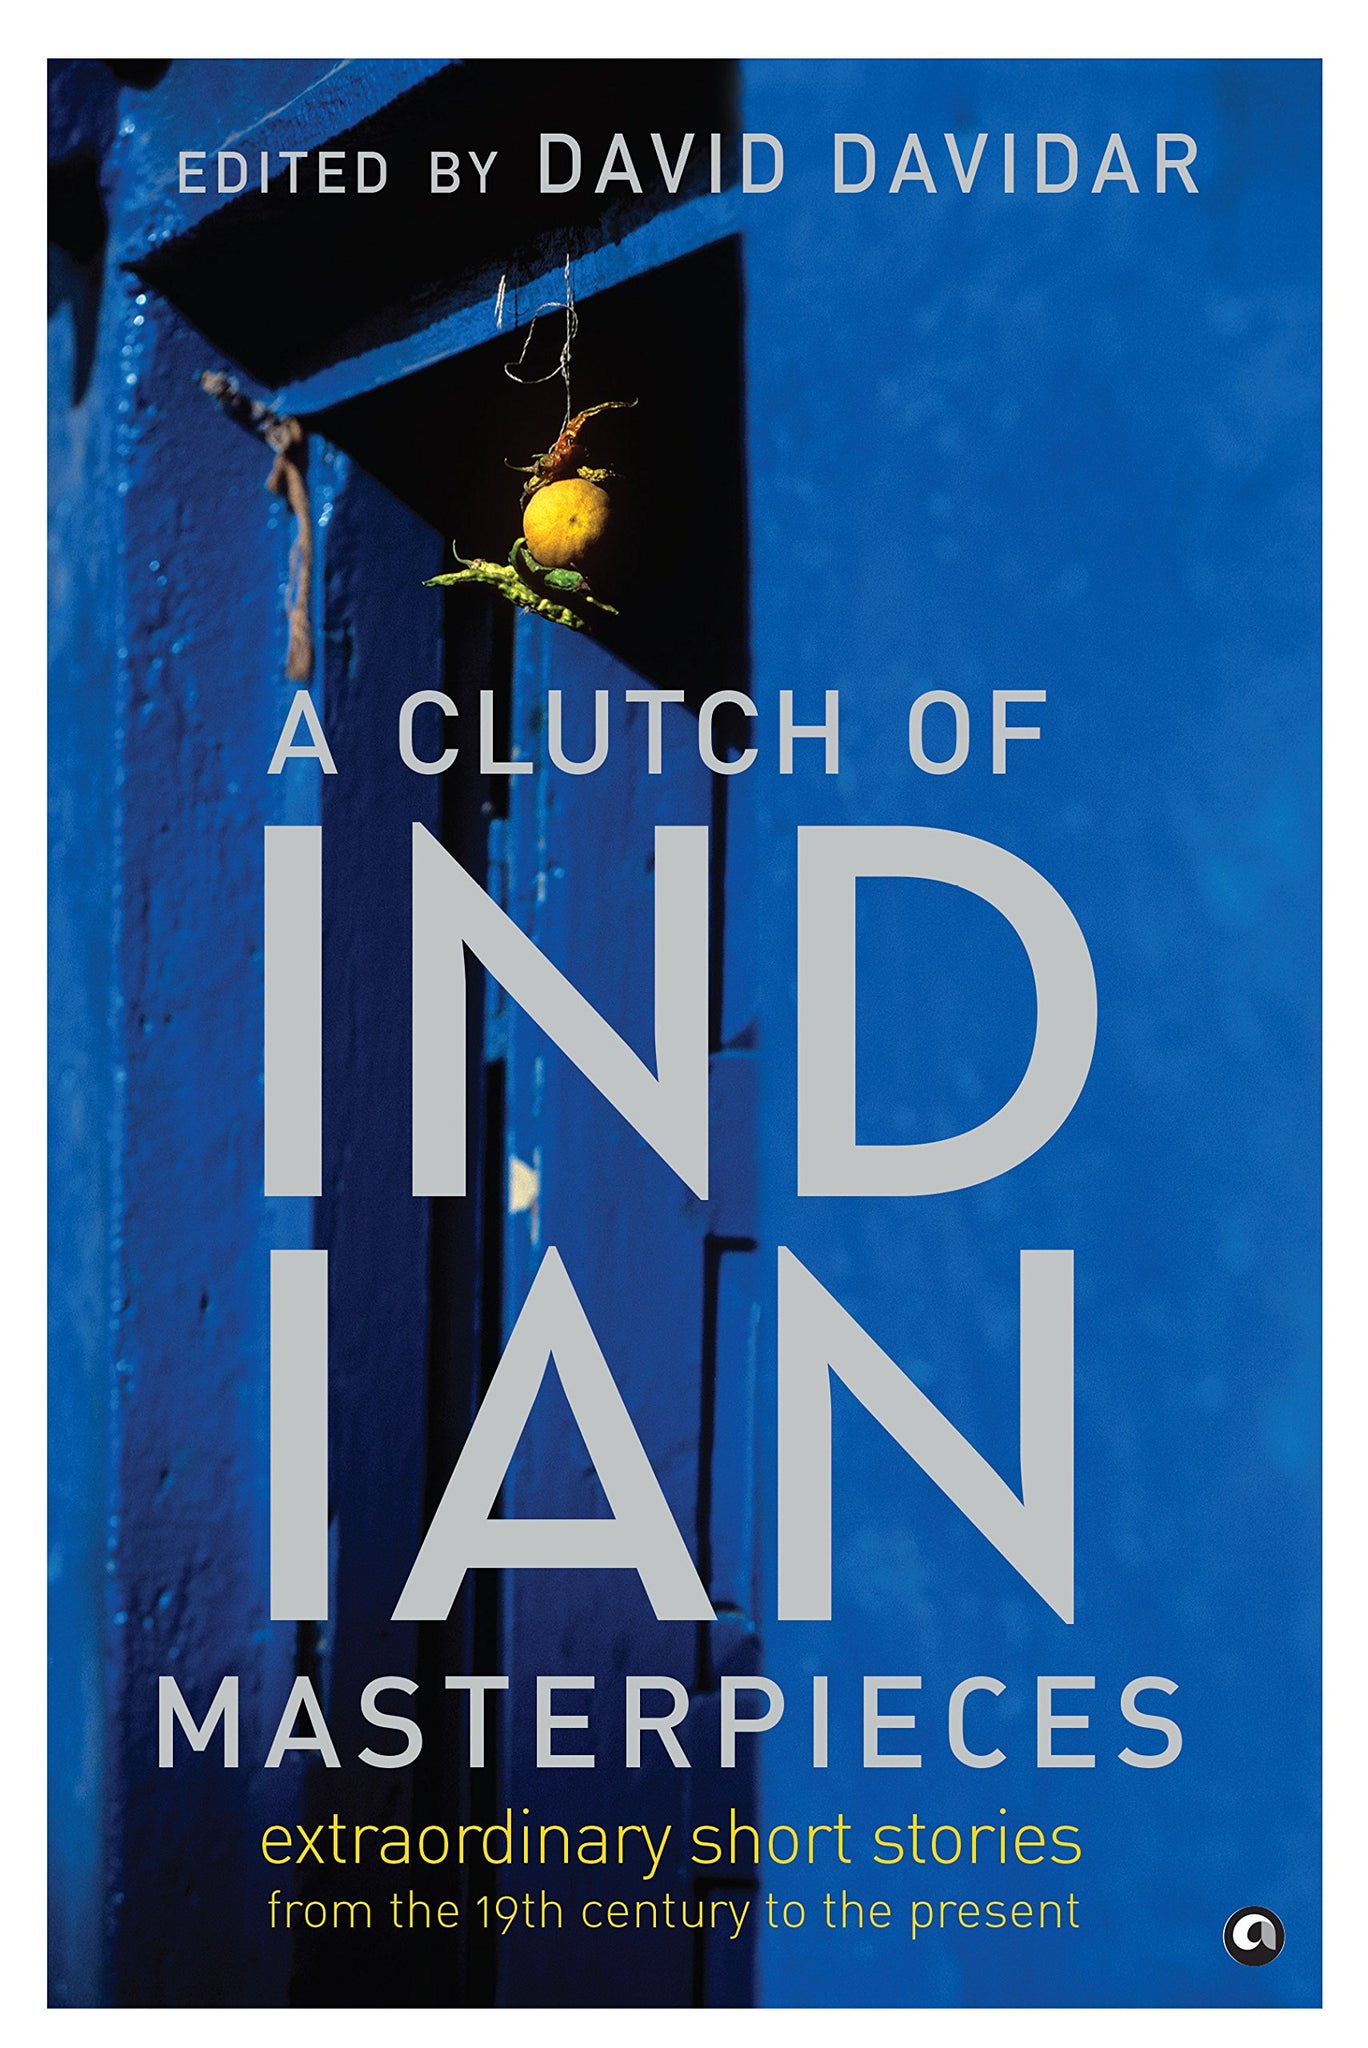 A Clutch of Indian Masterpieces